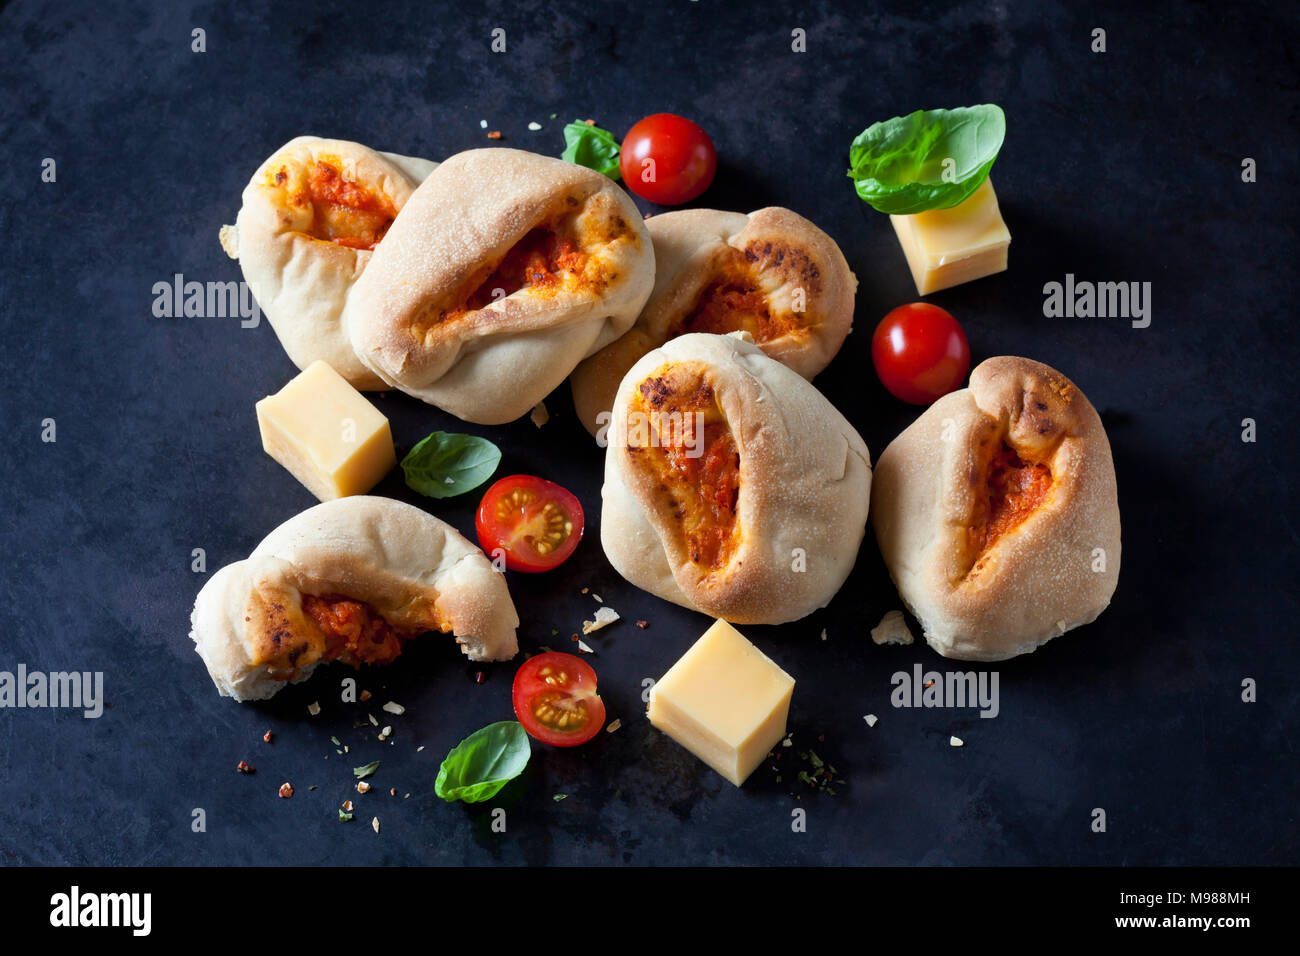 Pizza sticky buns, cherry tomatoes, diced cheese and basil leaves Stock Photo